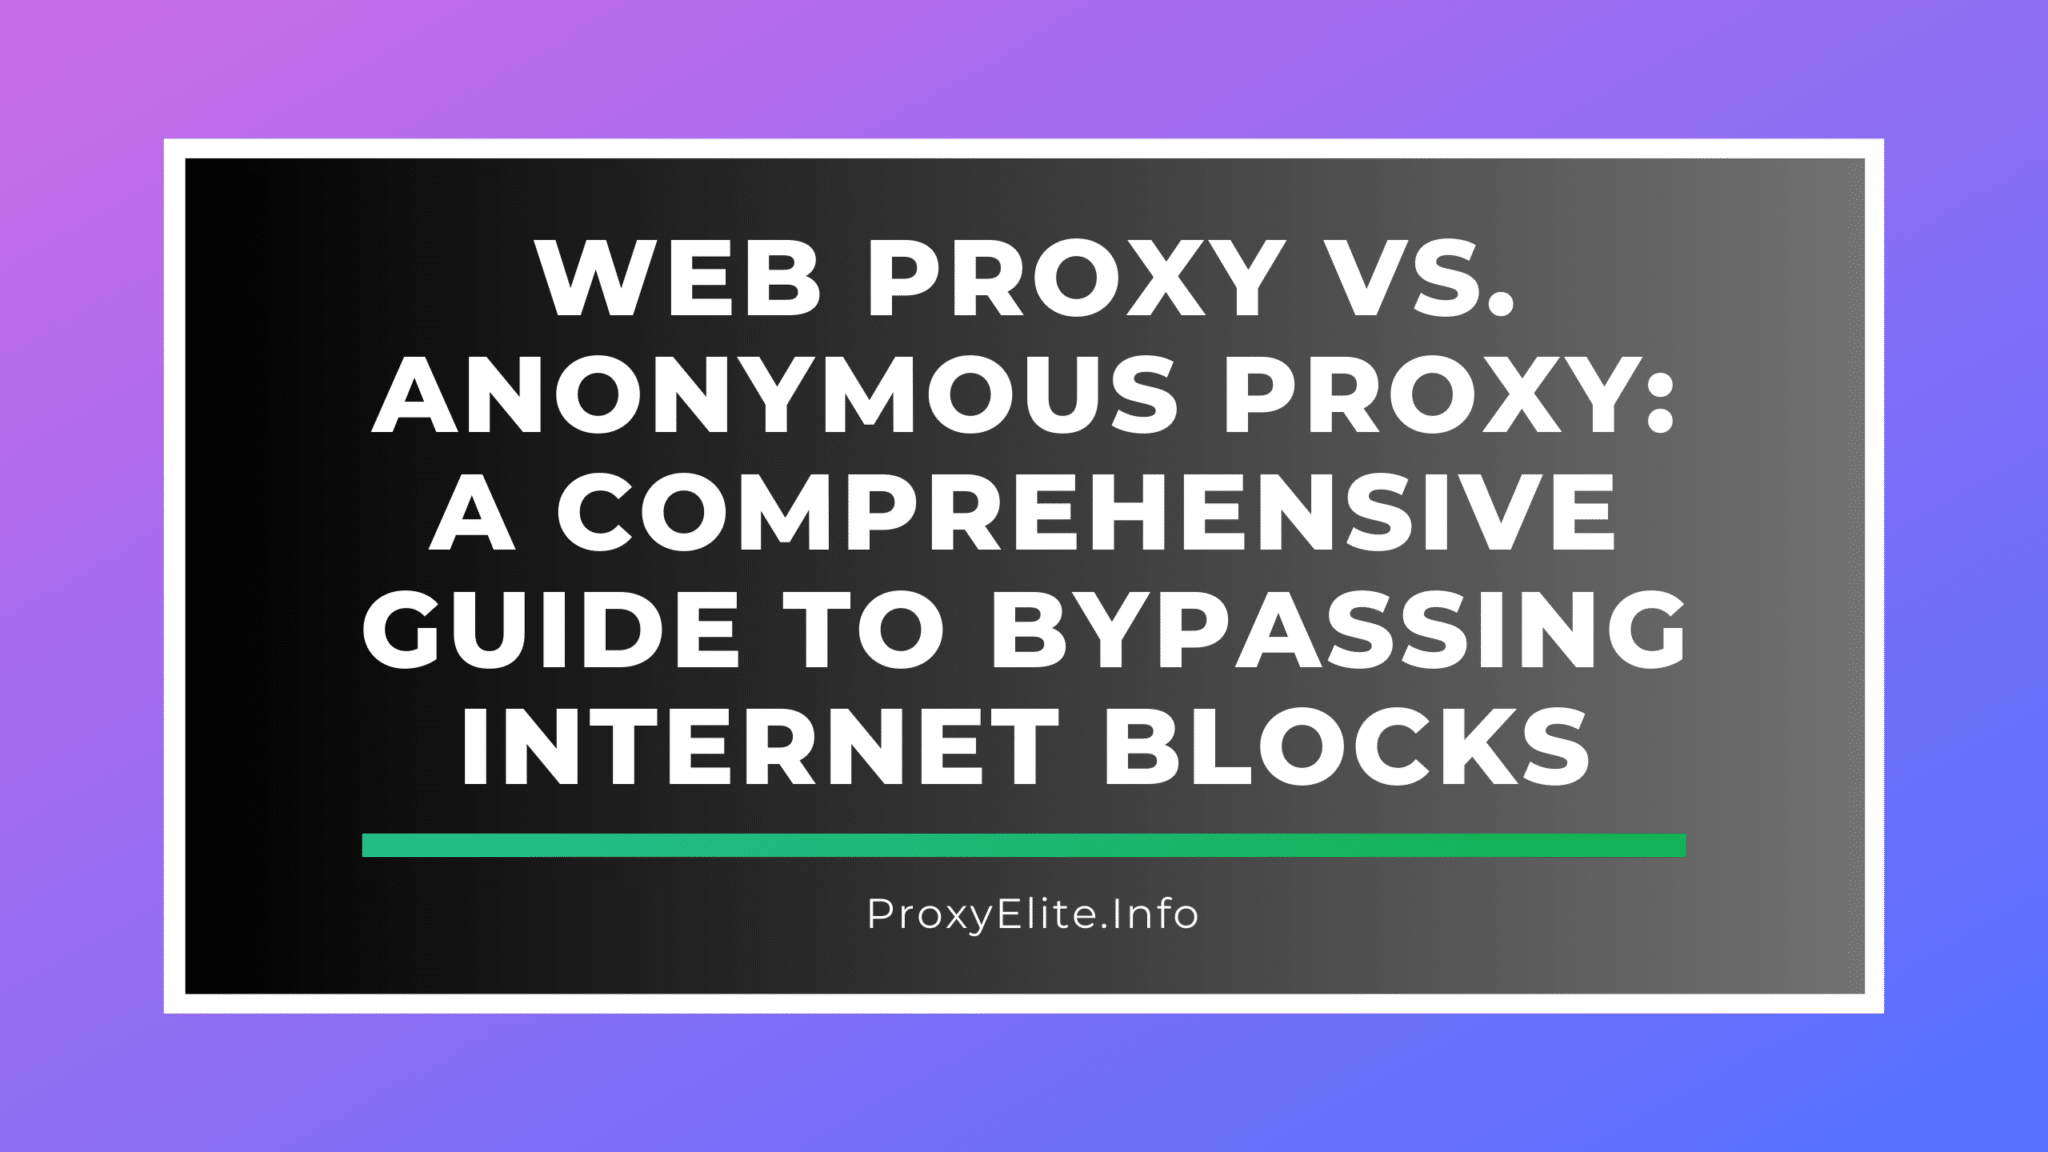 Web Proxy vs. Anonymous Proxy: A Comprehensive Guide to Bypassing Internet Blocks